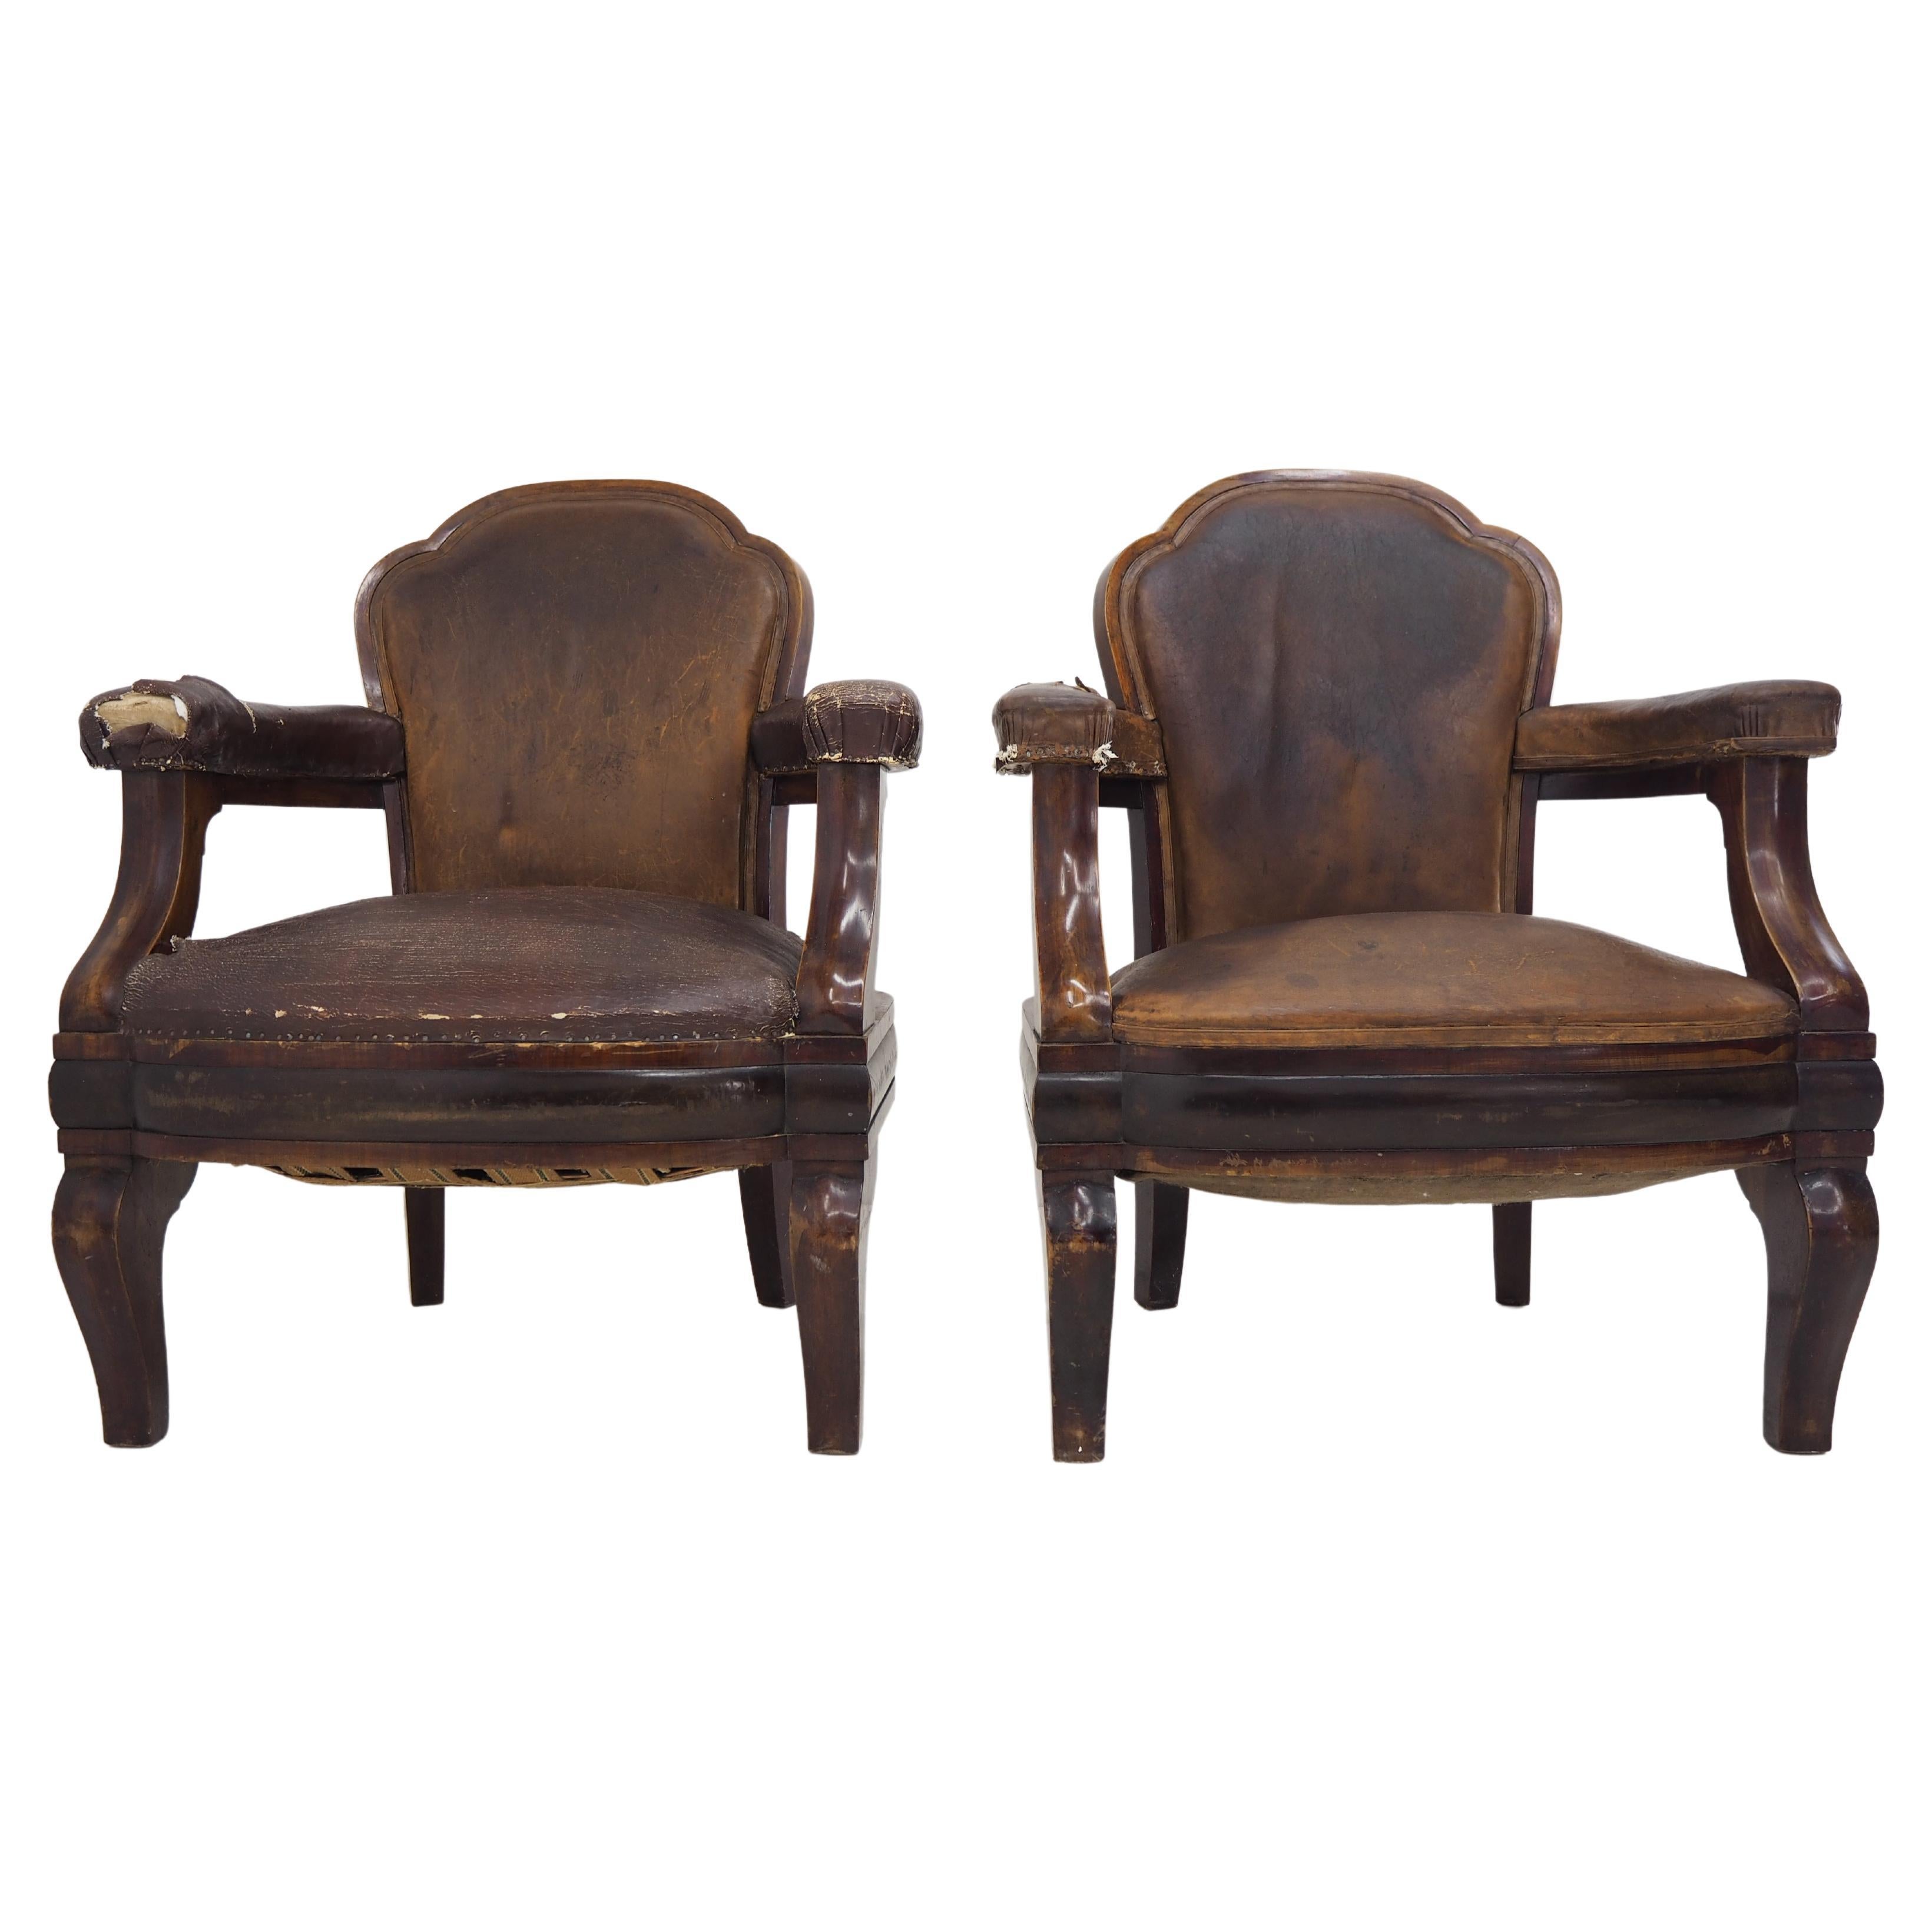 Rare Art Deco Armchairs from Ministry of Interior Czechoslovakia, 1930s